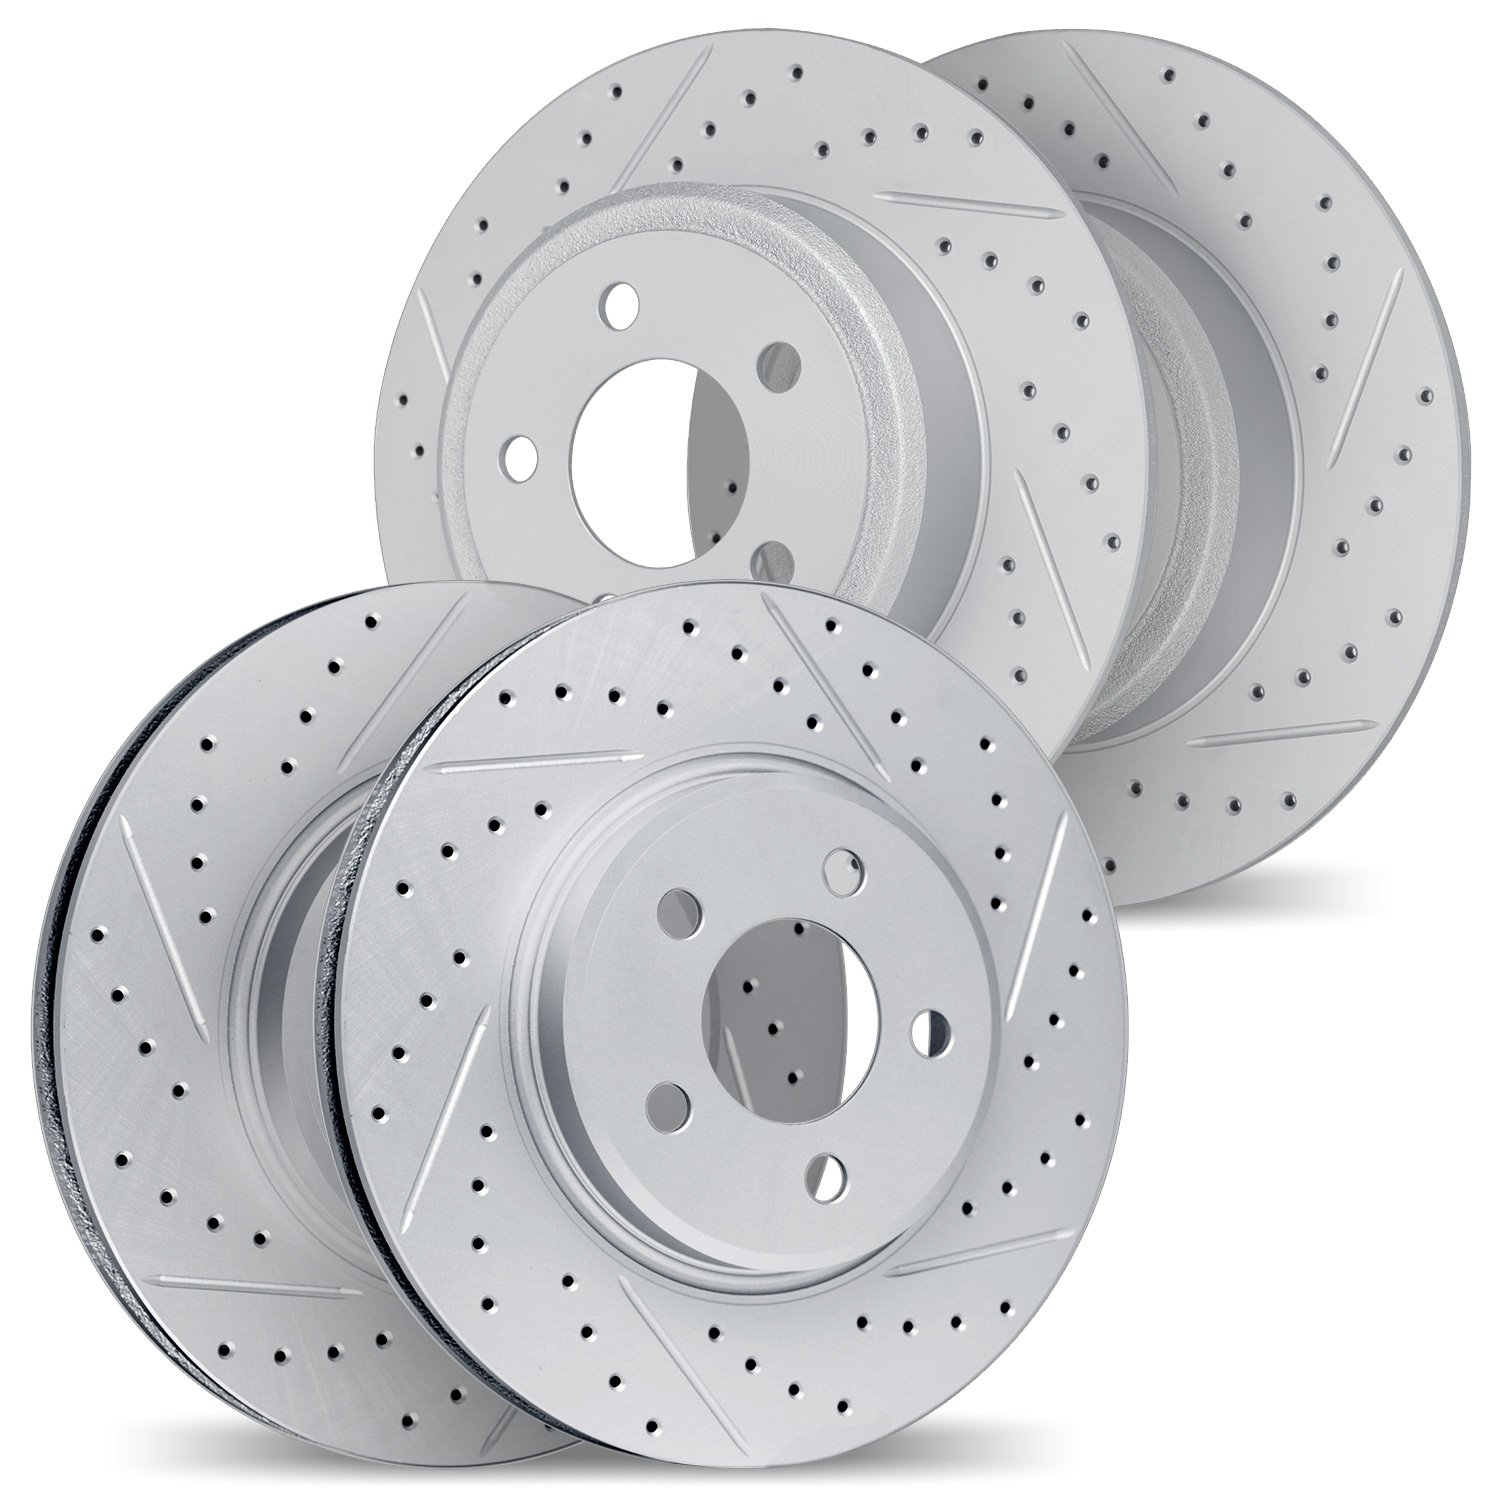 2004-45005 Geoperformance Drilled/Slotted Brake Rotors, Fits Select GM, Position: Front and Rear